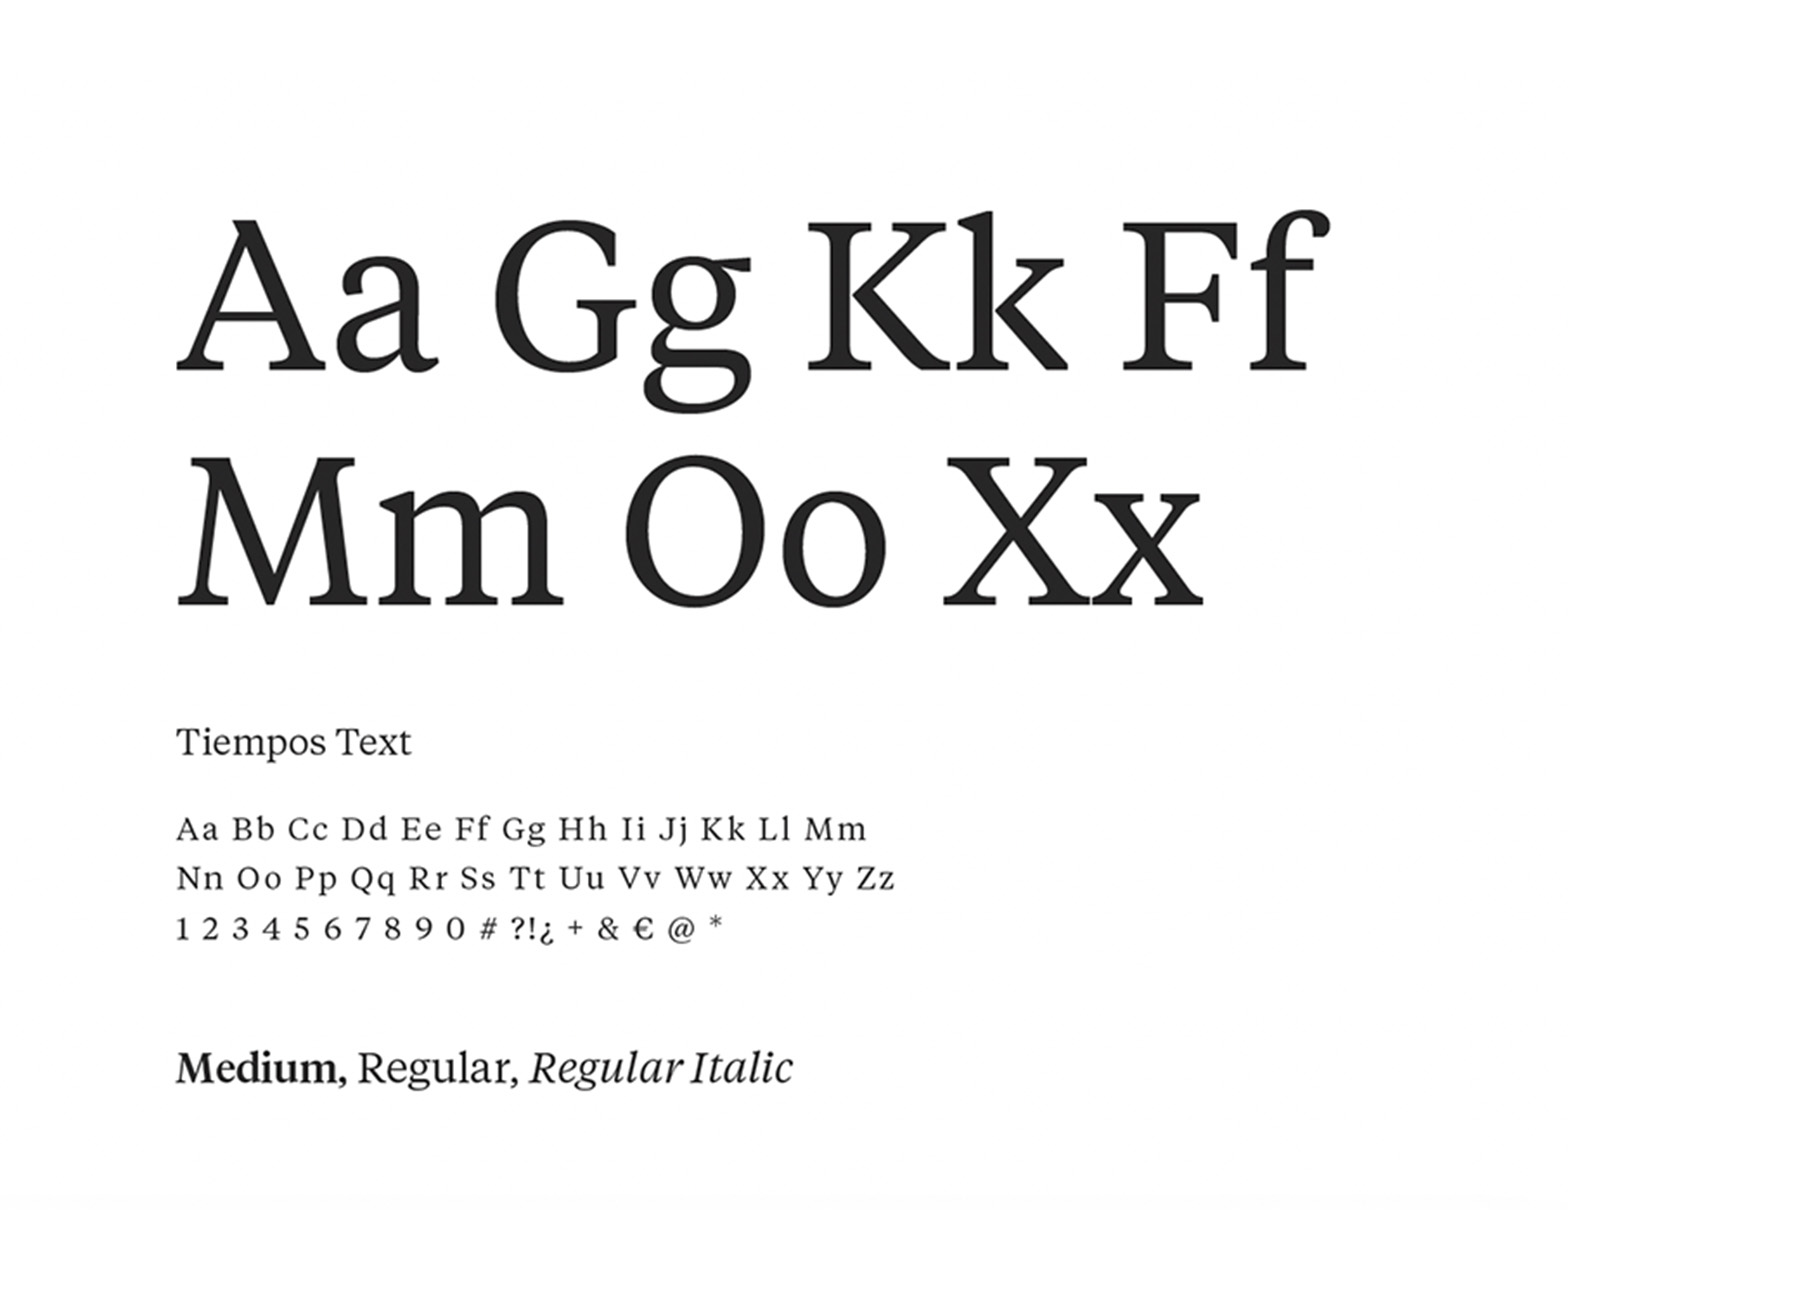 An example of the typeface 